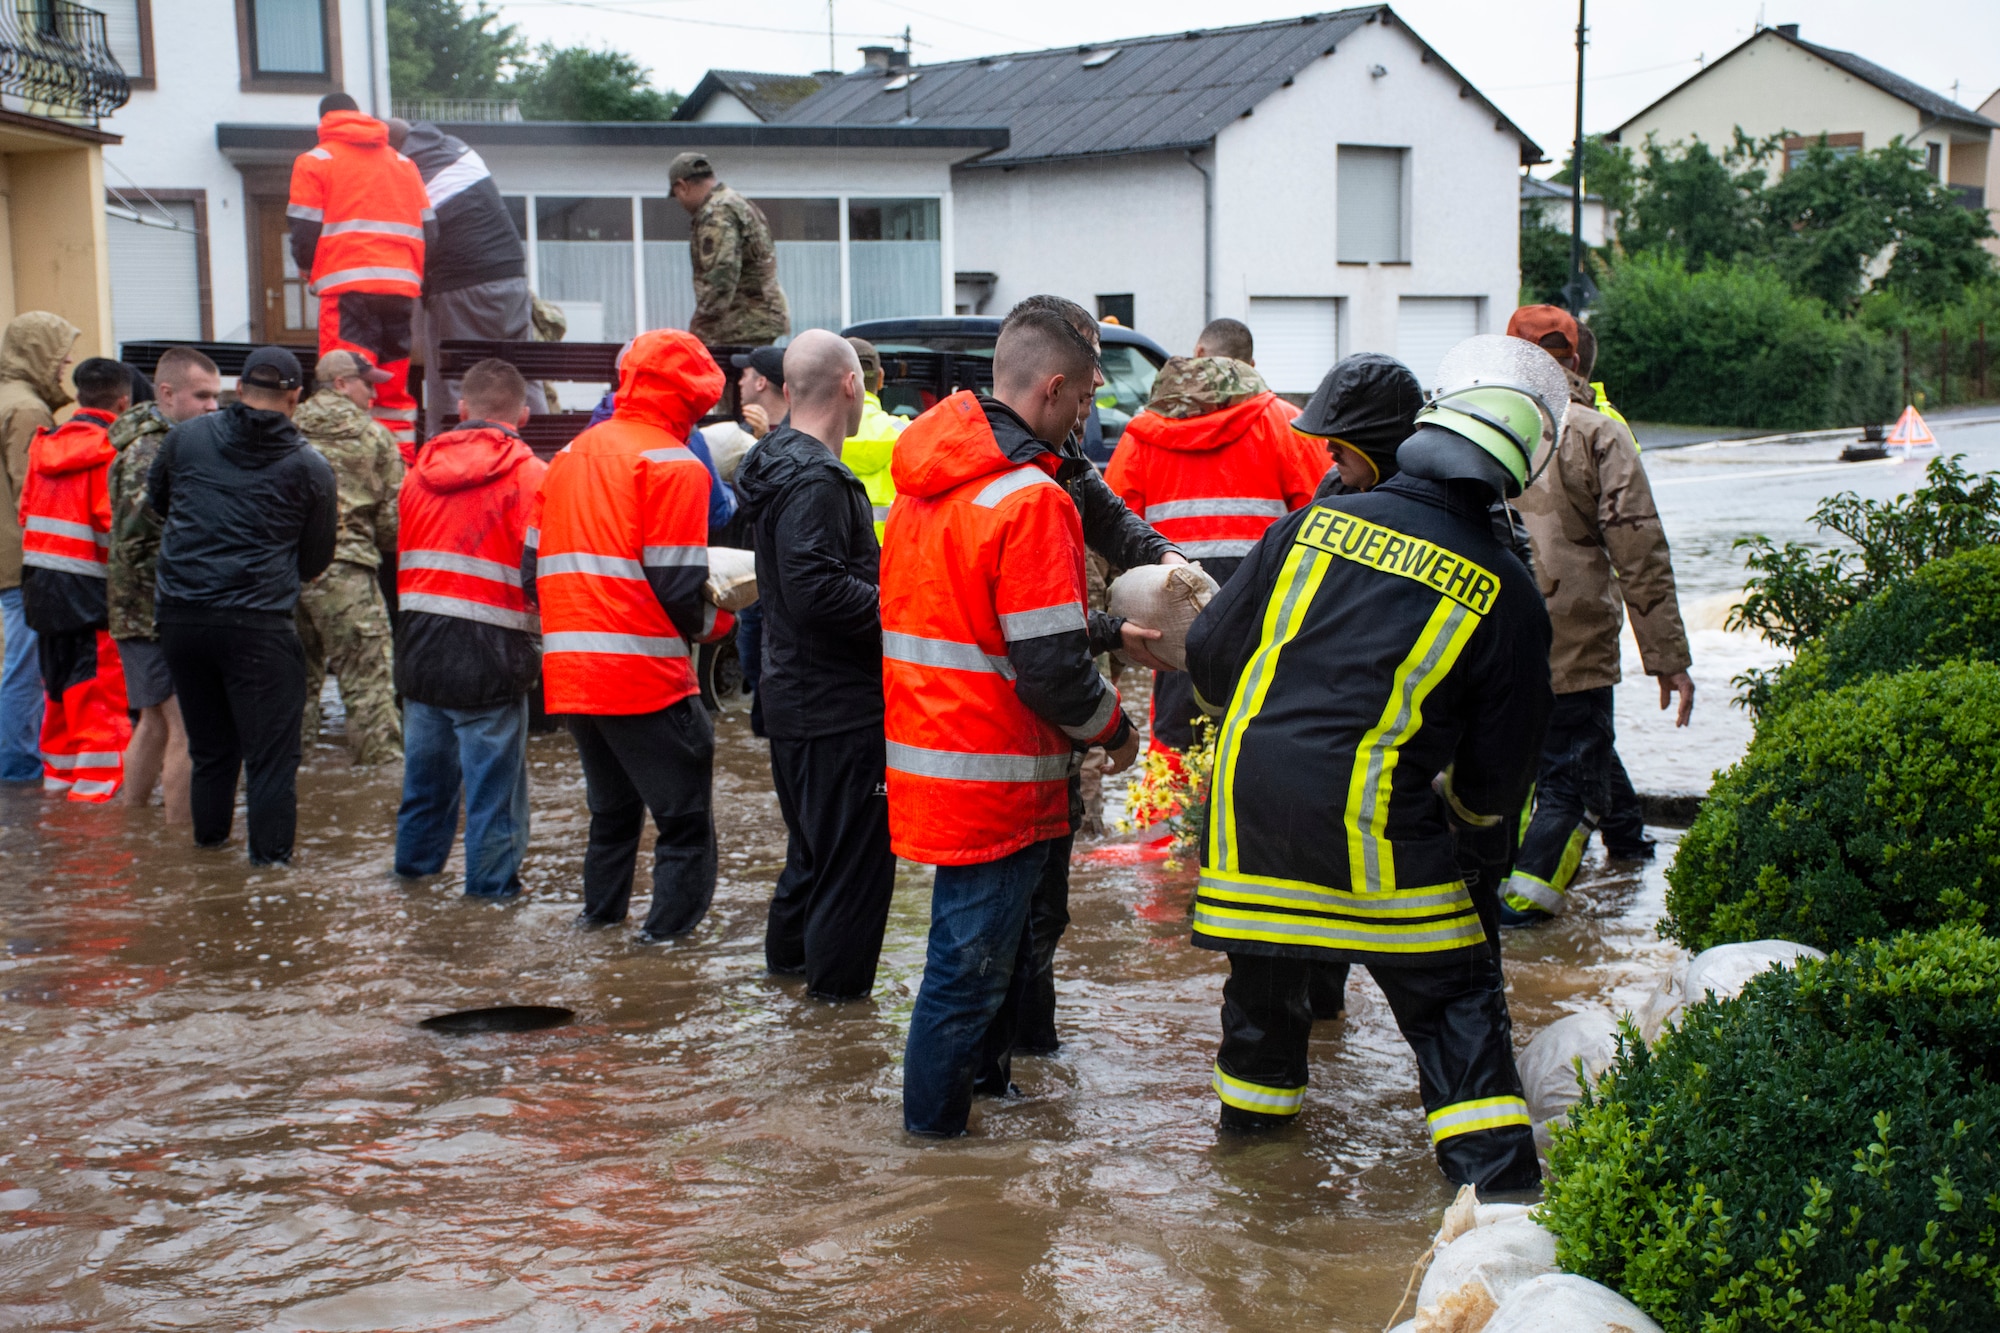 Members from the 52nd Civil Engineering Squadron work with German first responders and community members to quickly lay hundreds of sandbags throughout the town of Binsfeld, Germany, July 14, 2021.